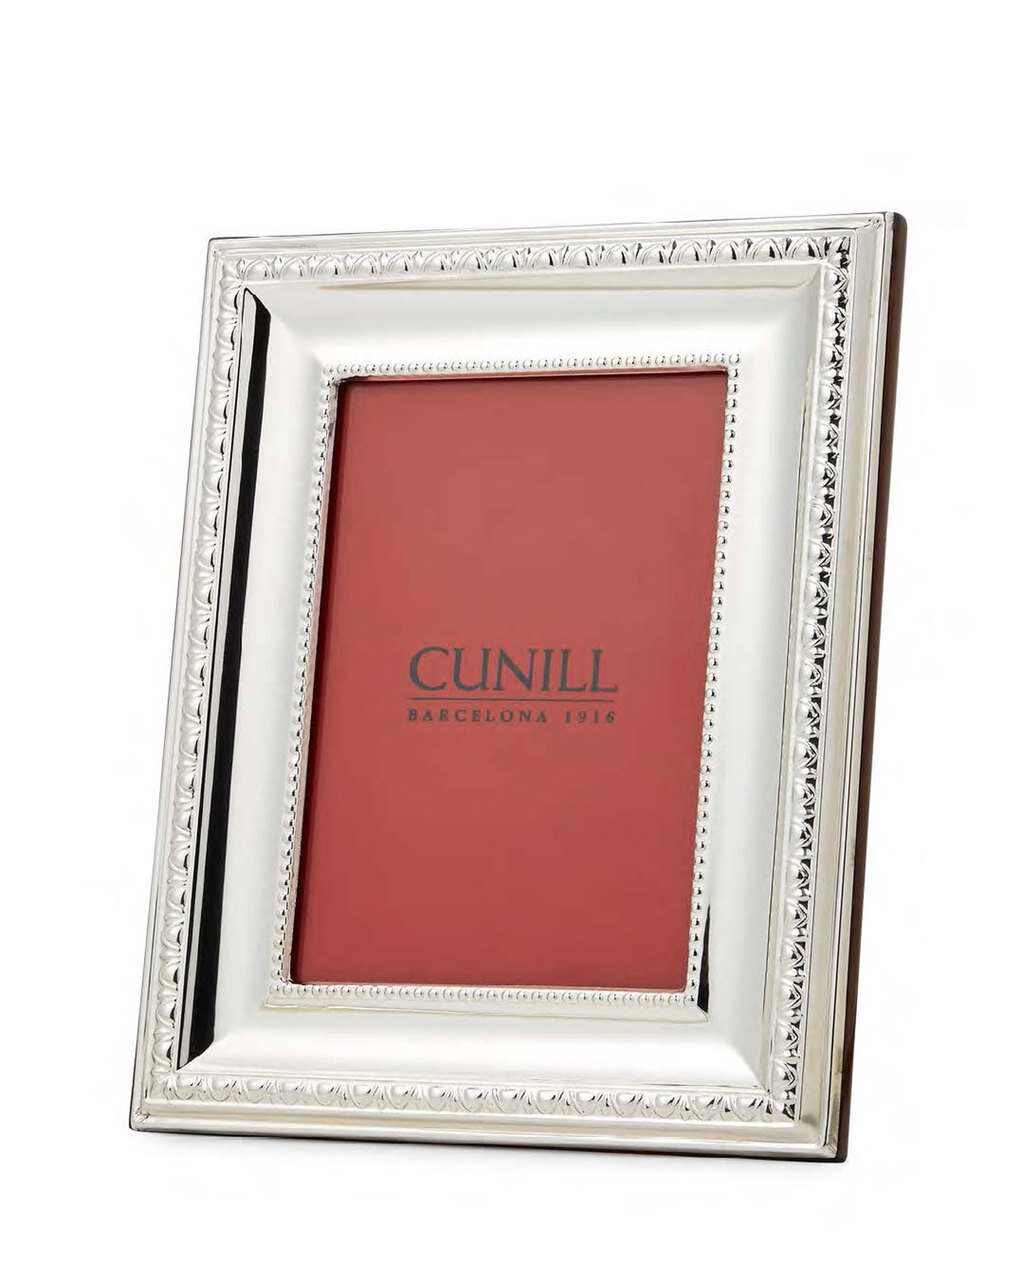 Cunill Prestige 5 x 7 Inch Picture Frame - Sterling Silver